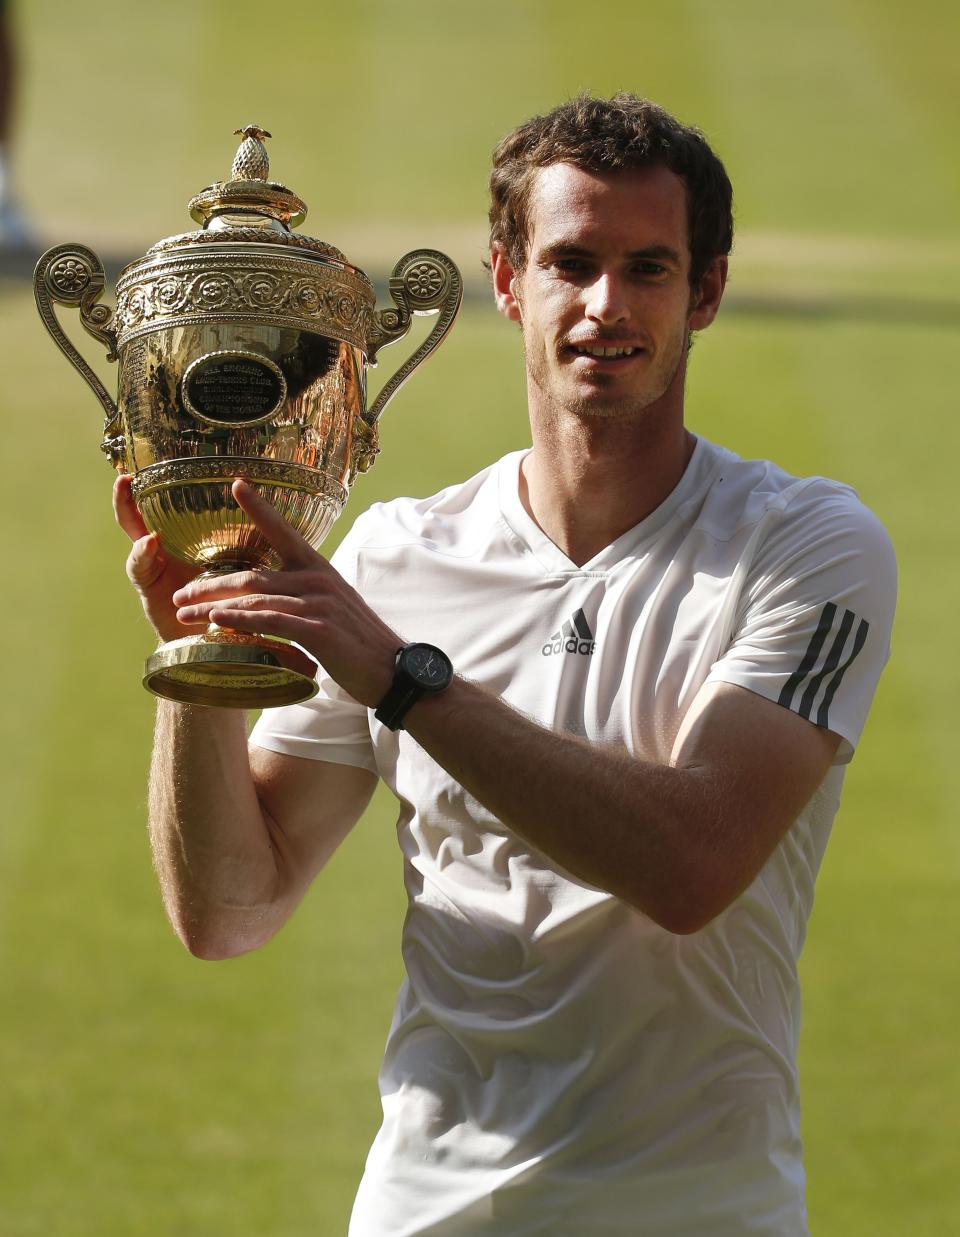 Great Britain's Andy Murray celebrates with the trophy after defeating Serbia's Novak Djokovic in the Men's Final during day thirteen of the Wimbledon Championships at The All England Lawn Tennis and Croquet Club, Wimbledon.